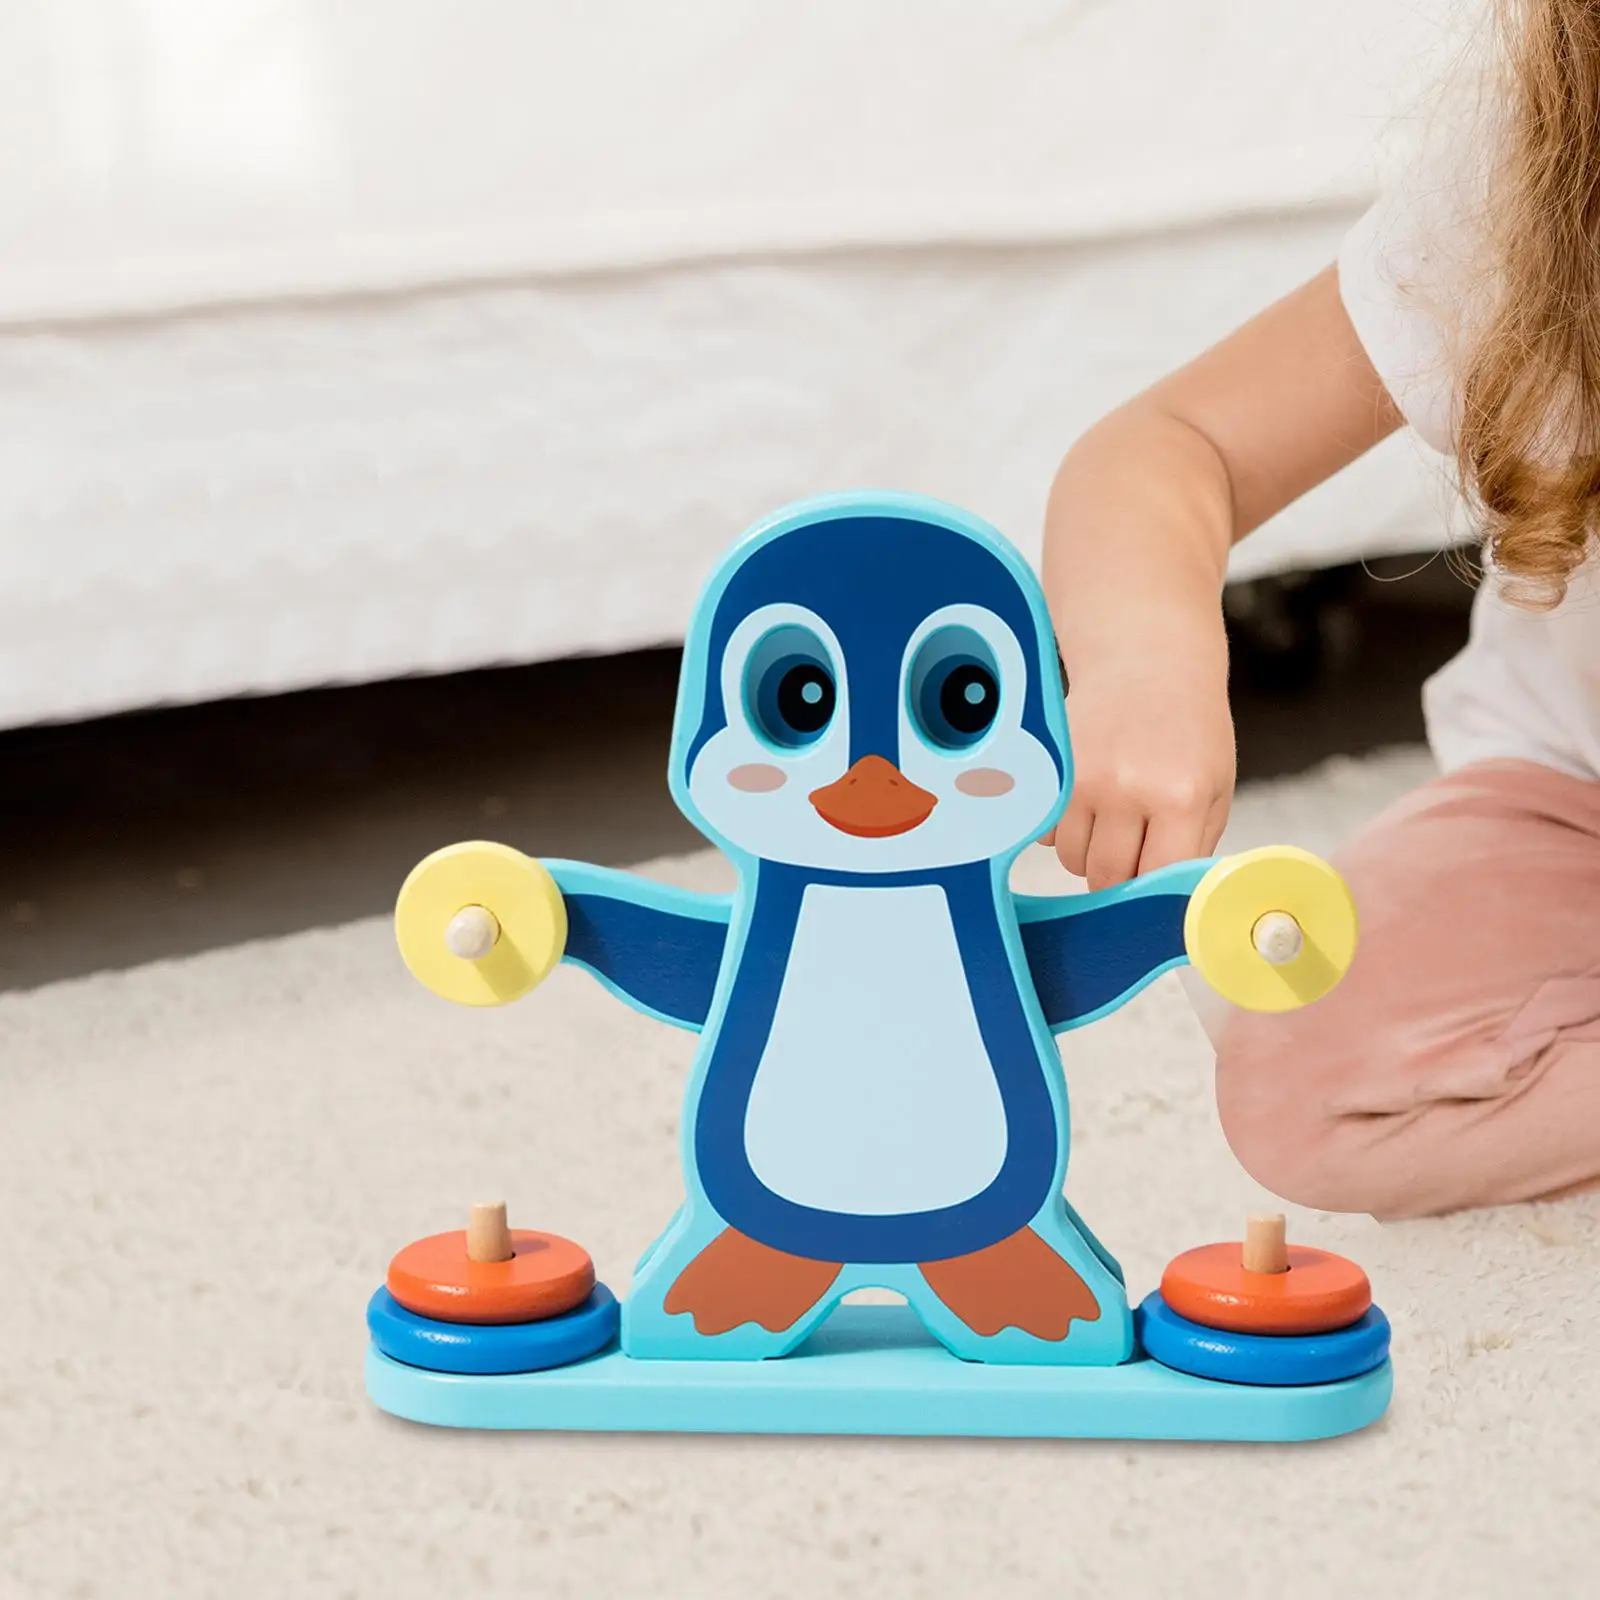 Penguin Balance Counting Game Number Recognition Learning Activities for Boys Girls Kindergarten Birthday Gift Children Math Toy